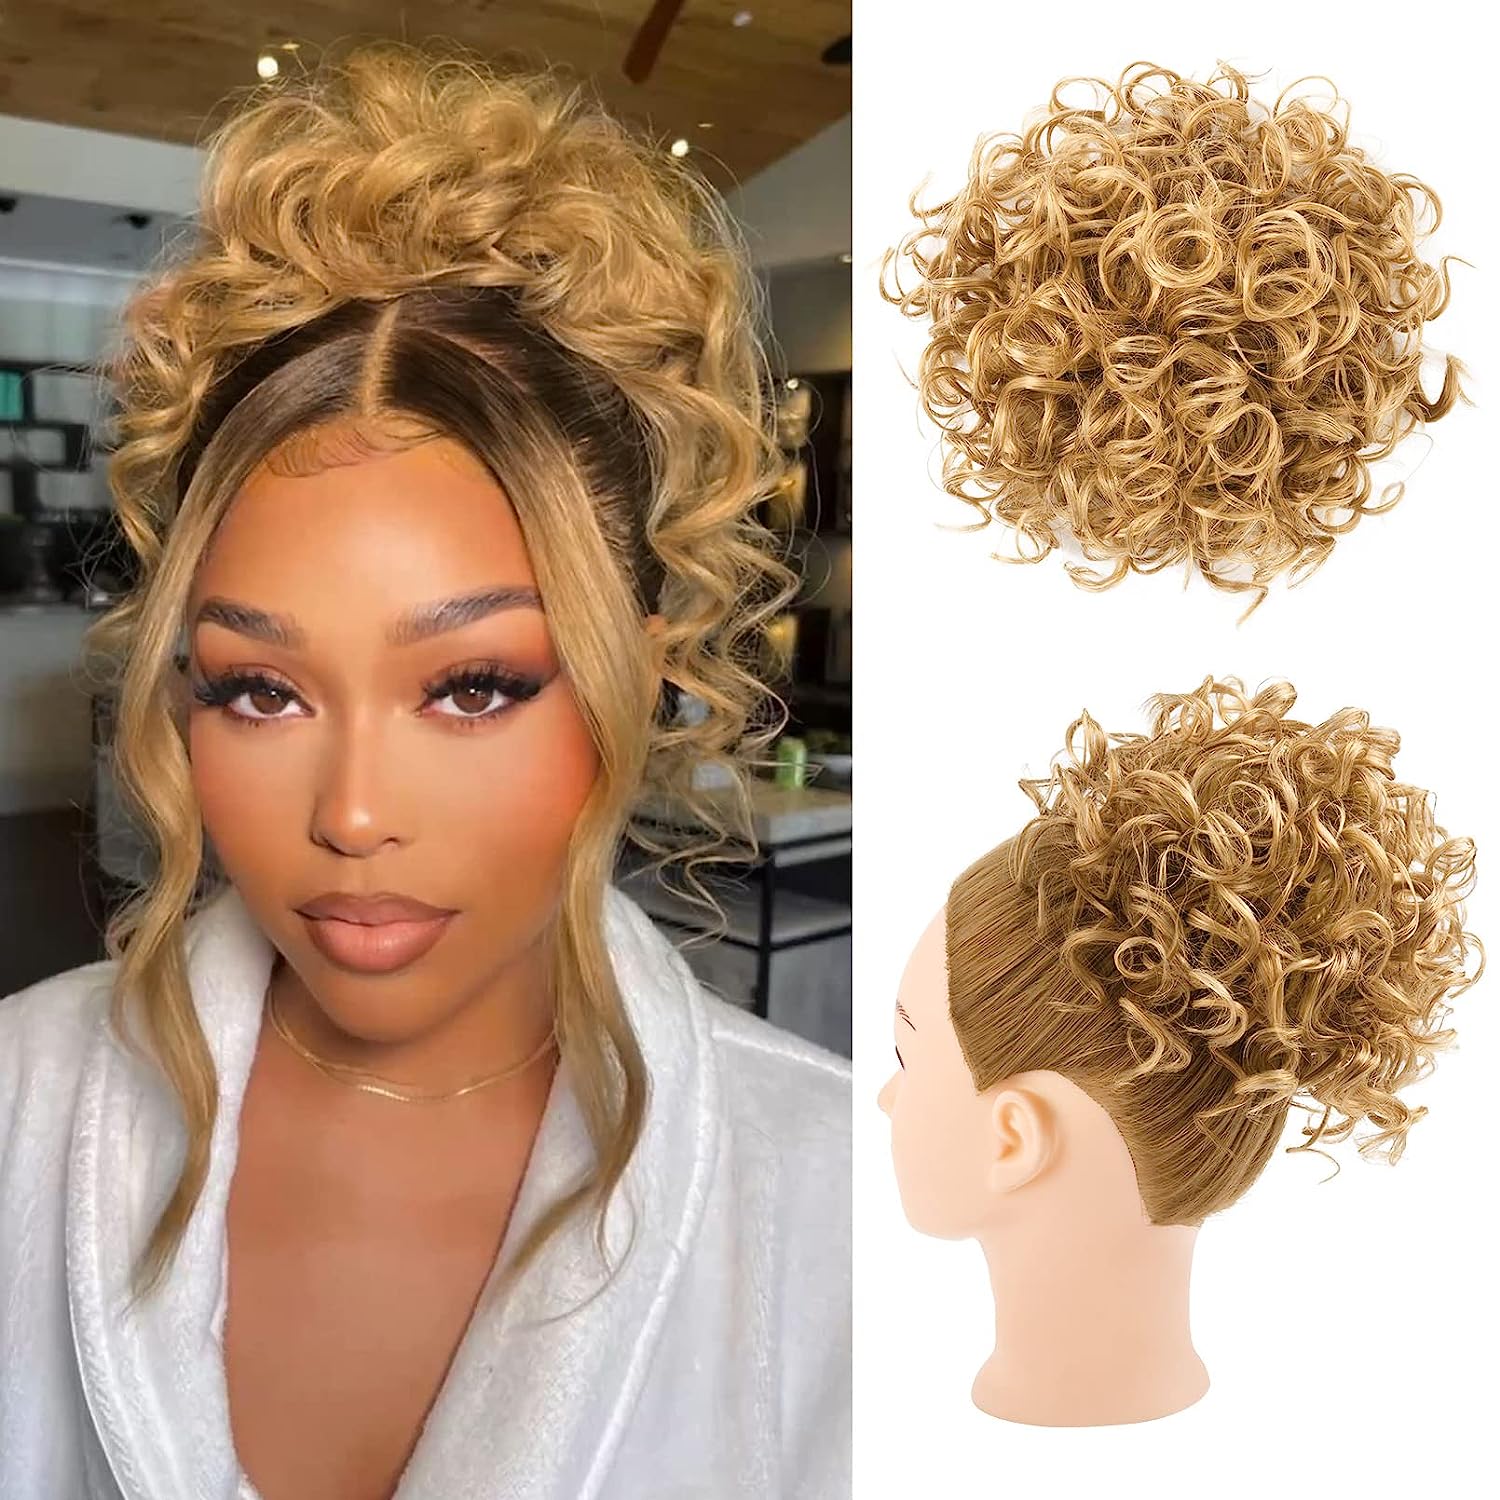 Hot Now🔥40% Off! Loose Wave Large Curly Bun